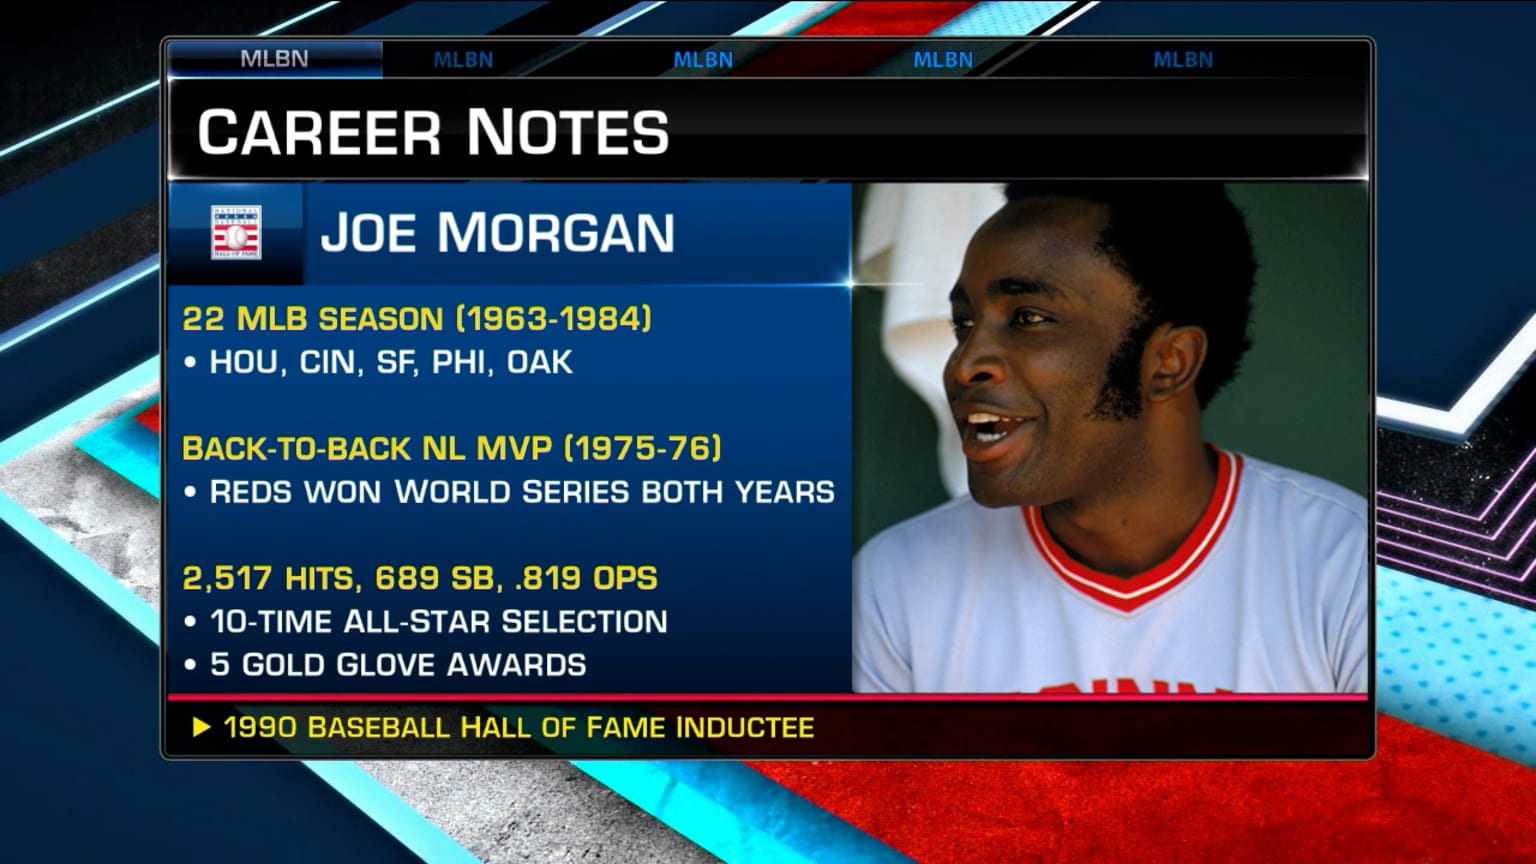 Morgan's hit wins World Series for Reds